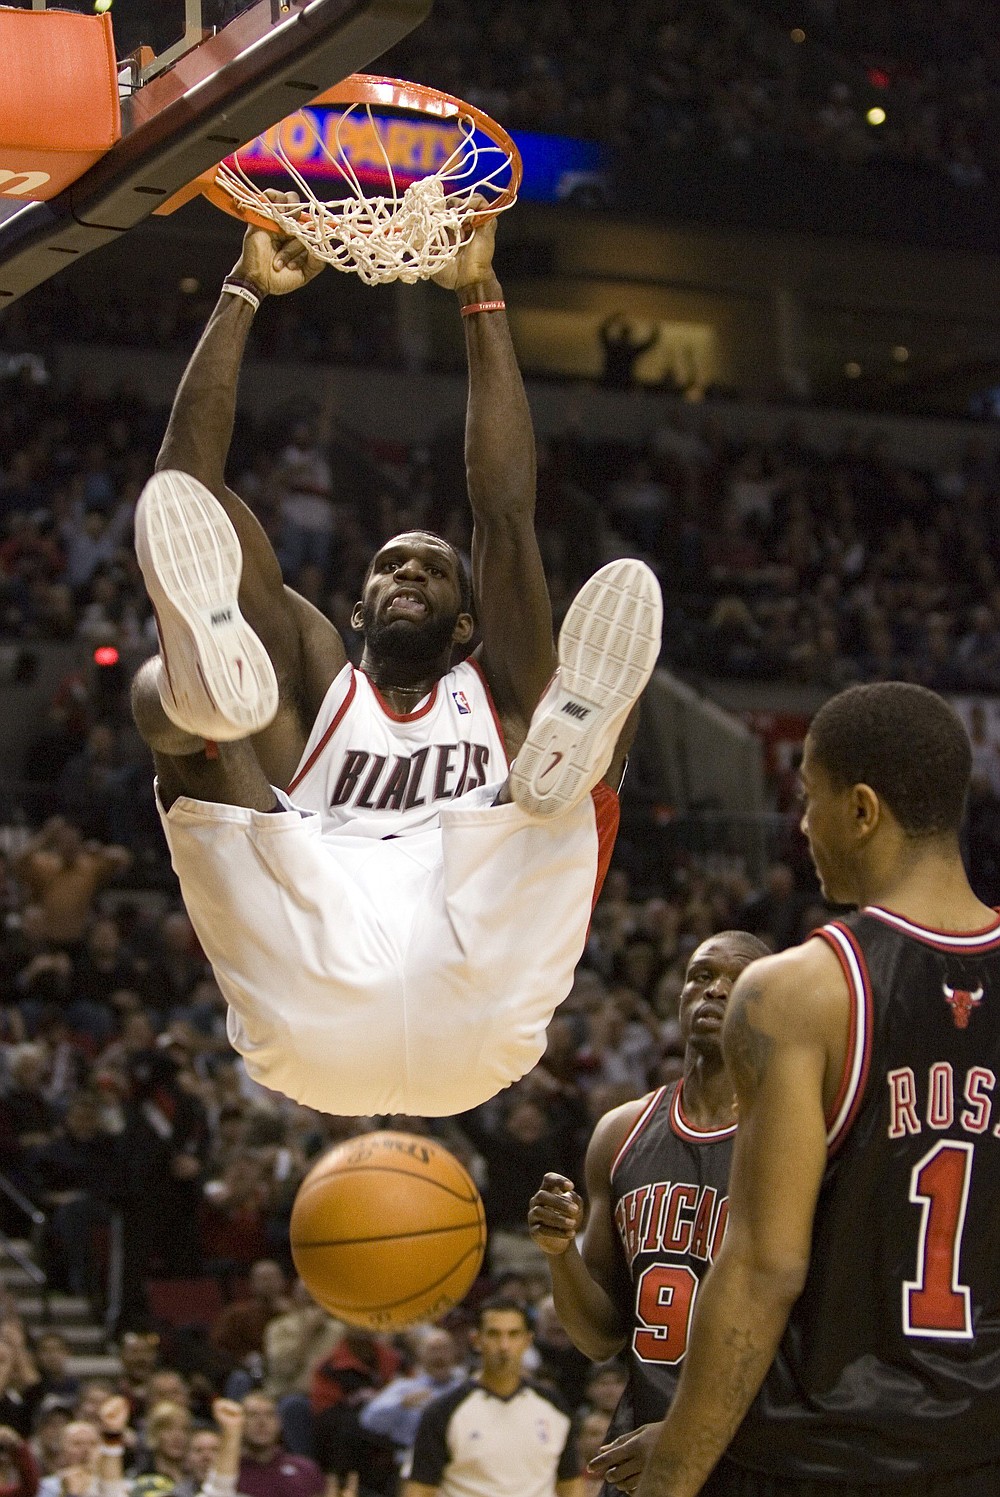 Don Ryan/The Associated Press
Portland's Greg Oden slams home two of his 24 points Monday in front of Chicago's Derrick Rose, right, and Luol Deng. Oden also had 12 rebounds and blocked two shots in the Blazers' victory.